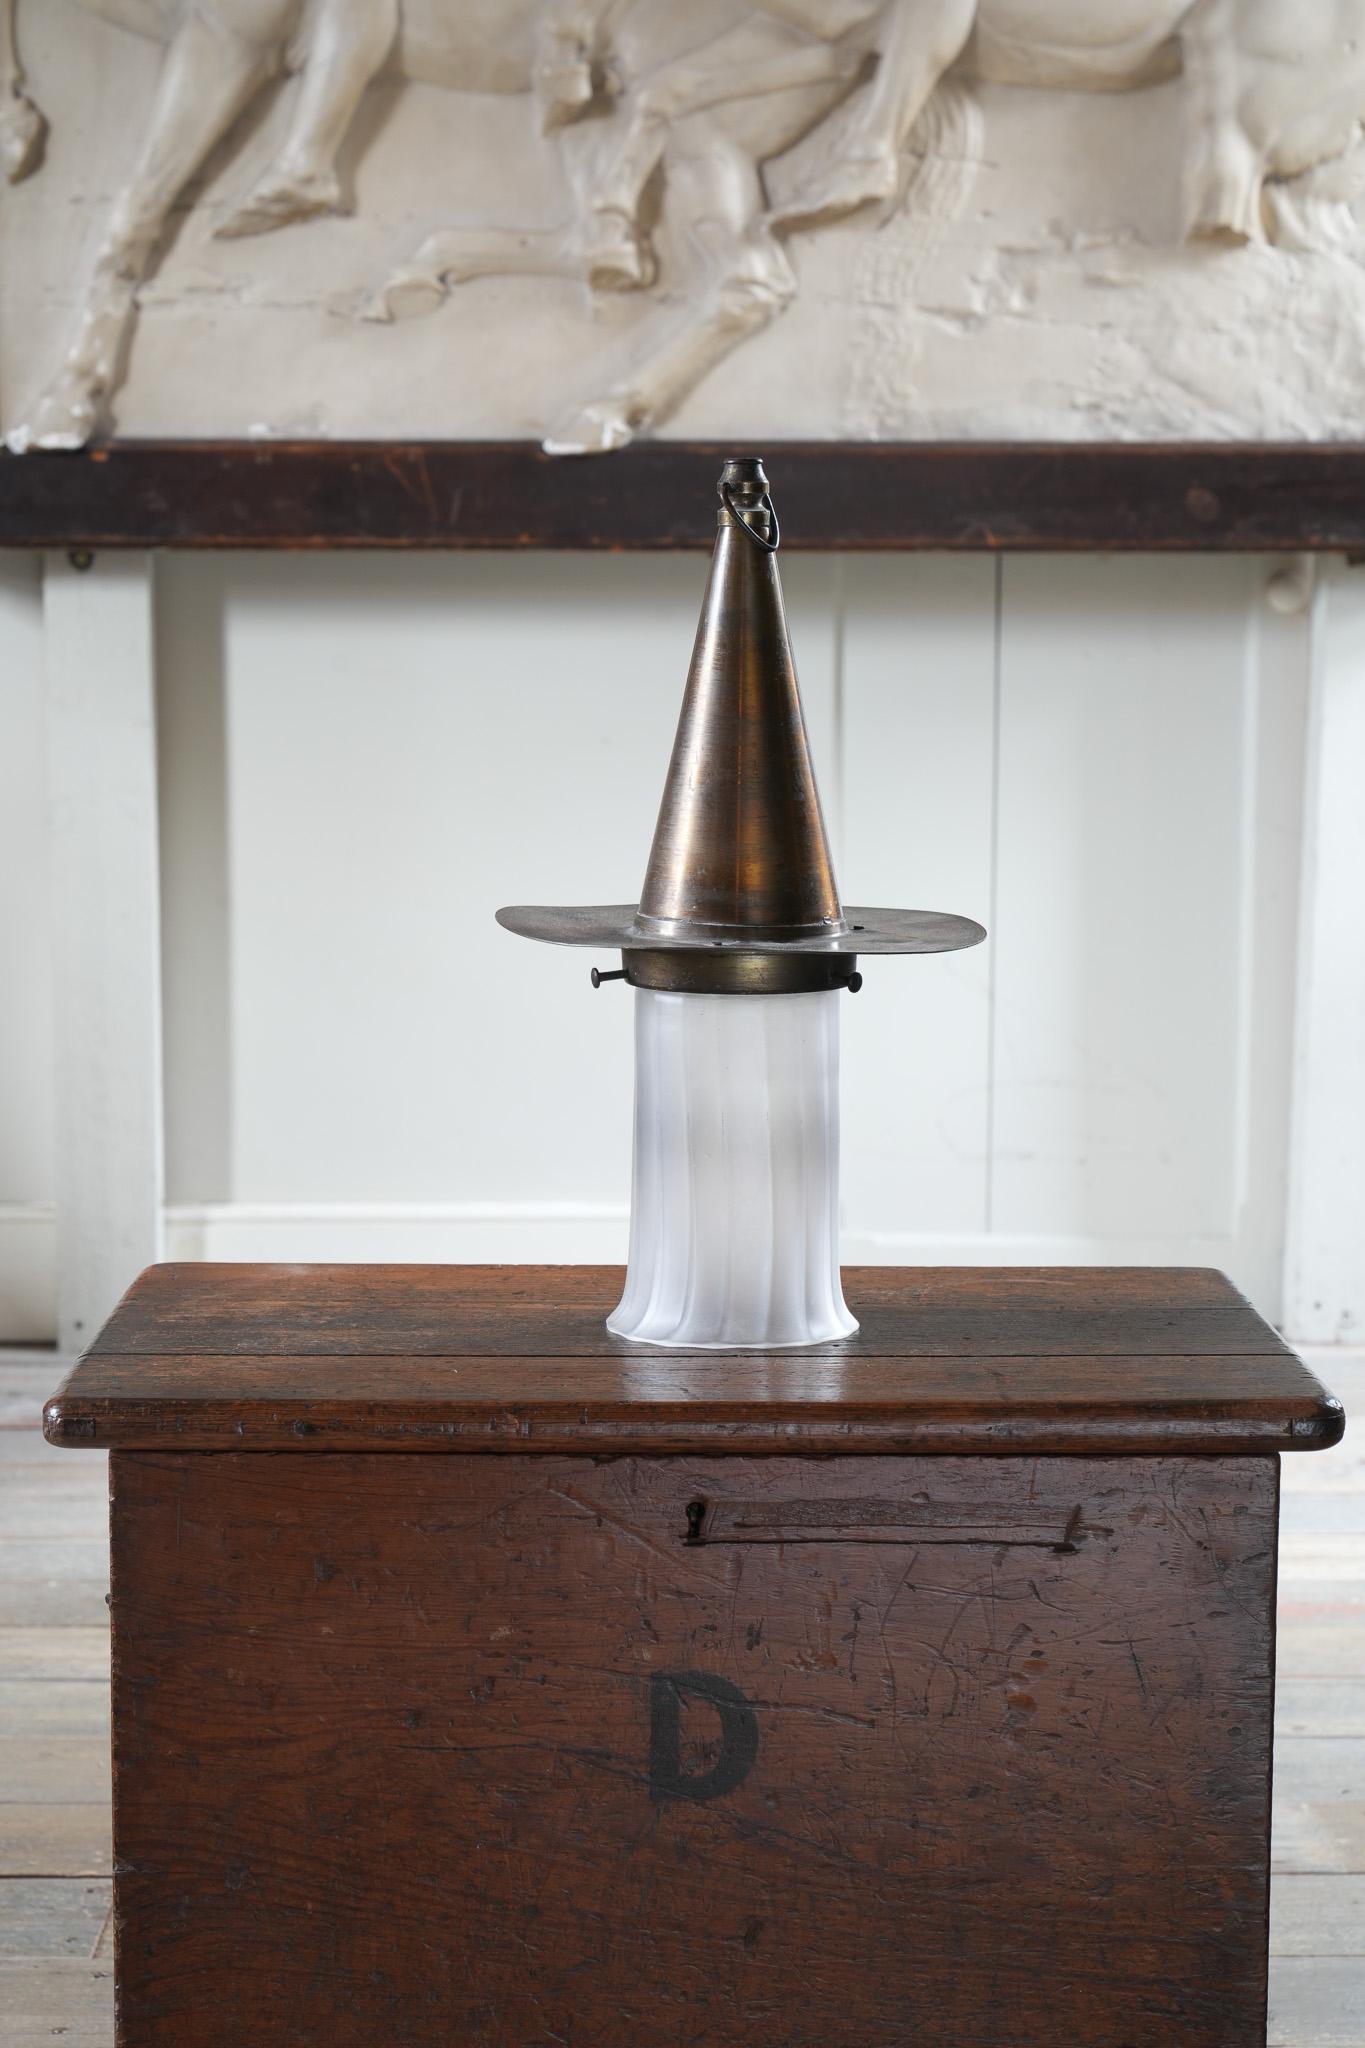 The patinated brass “Witches Hat” supporting a reeded and acid etched shade.